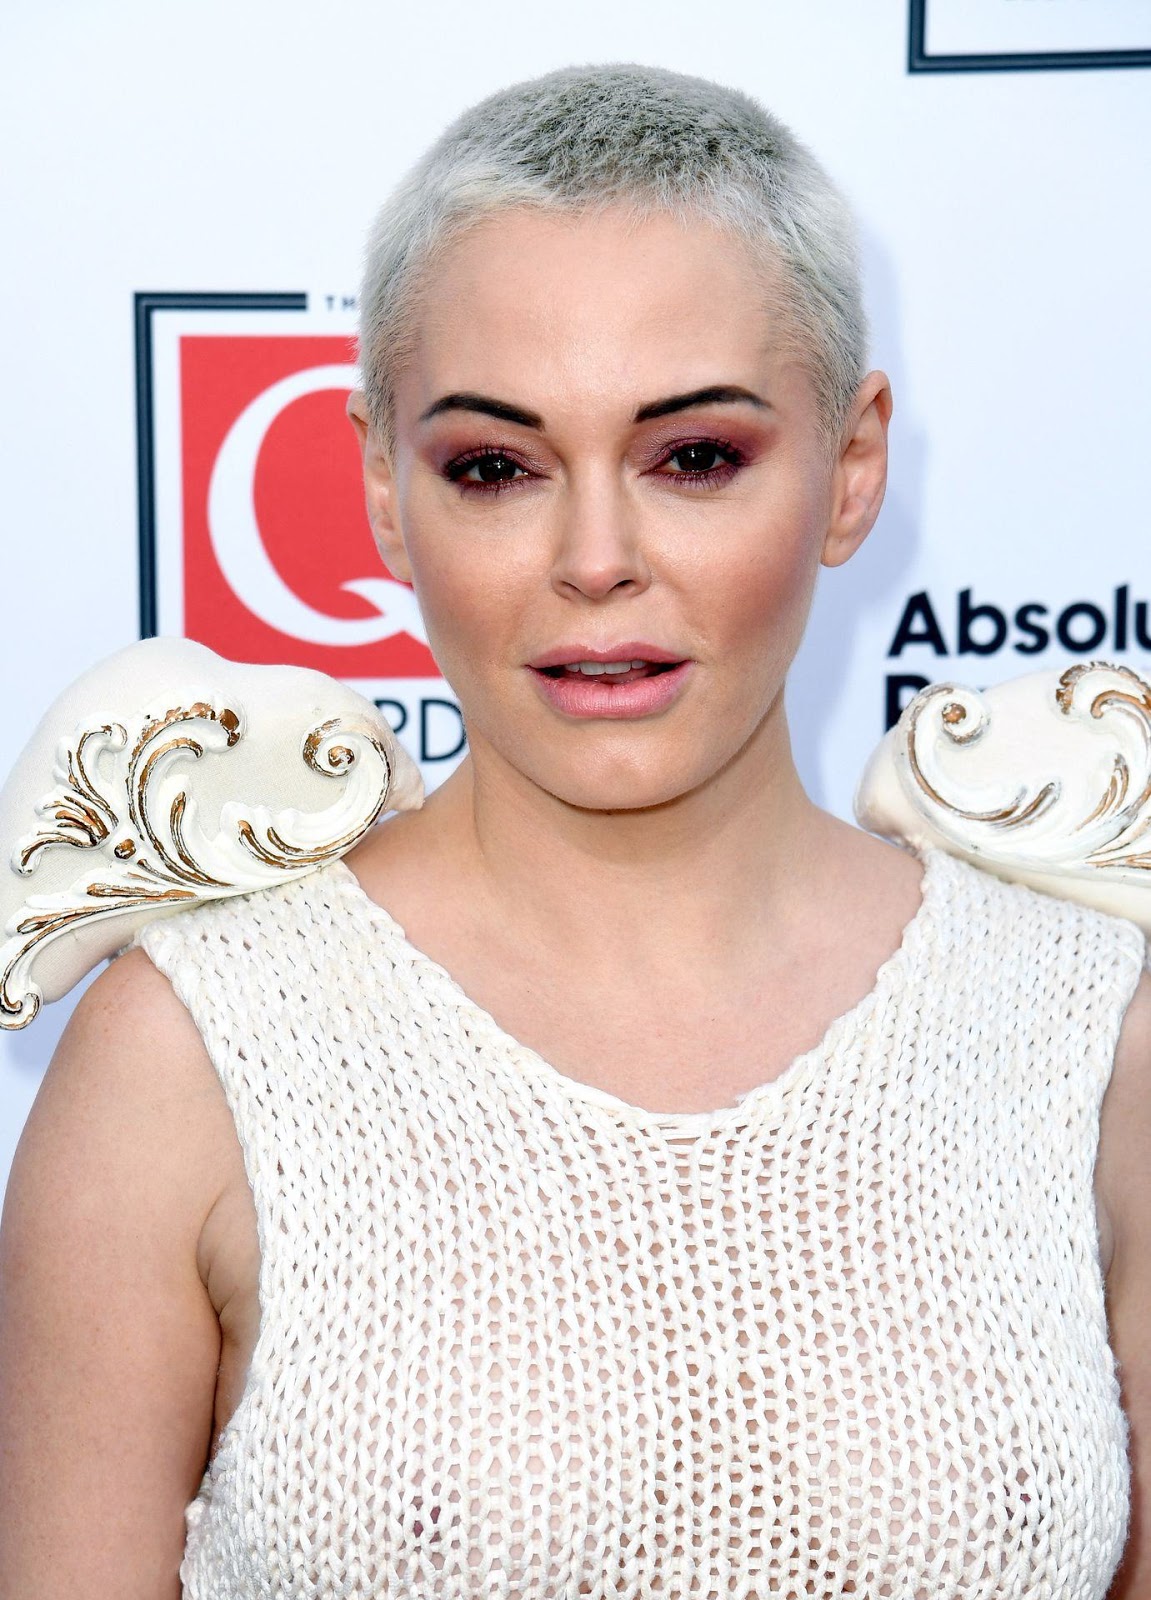 You are looking on "http://scandalshack.com/titties-rose-mcgowan/"...